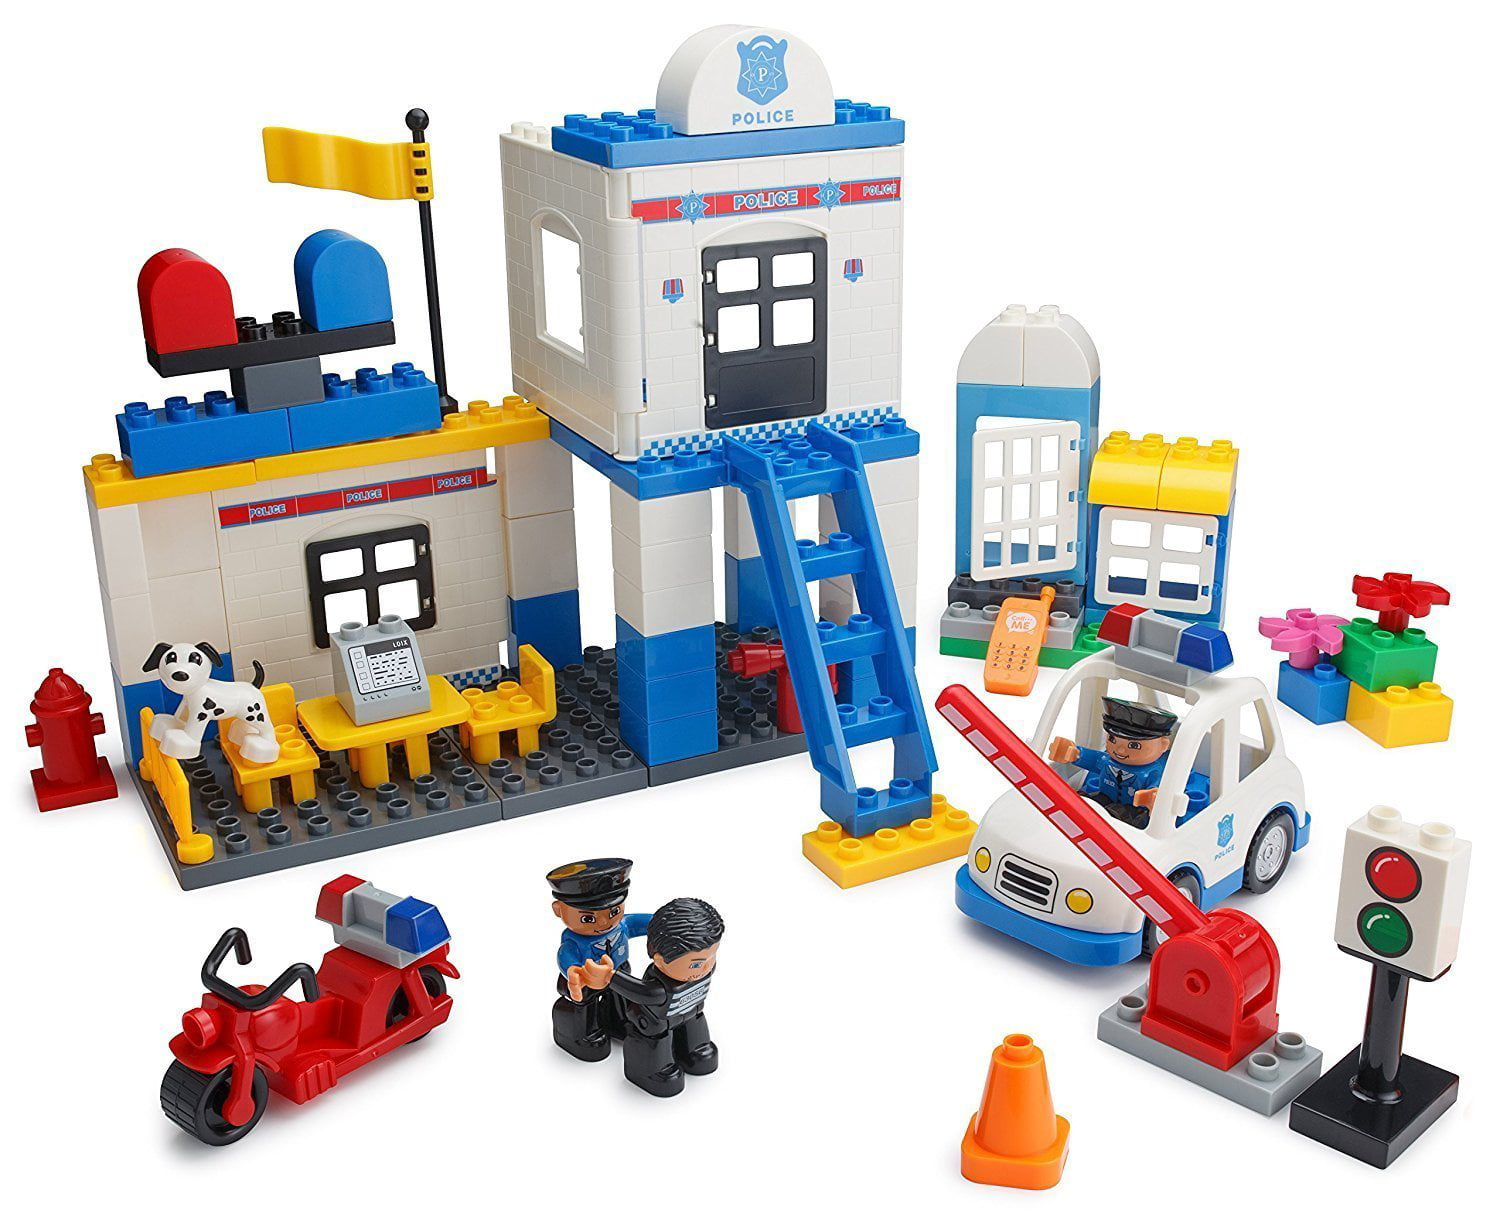 Police Dept Patrol Unit Construction Blocks My Blox Compatible With Other Brands for sale online 